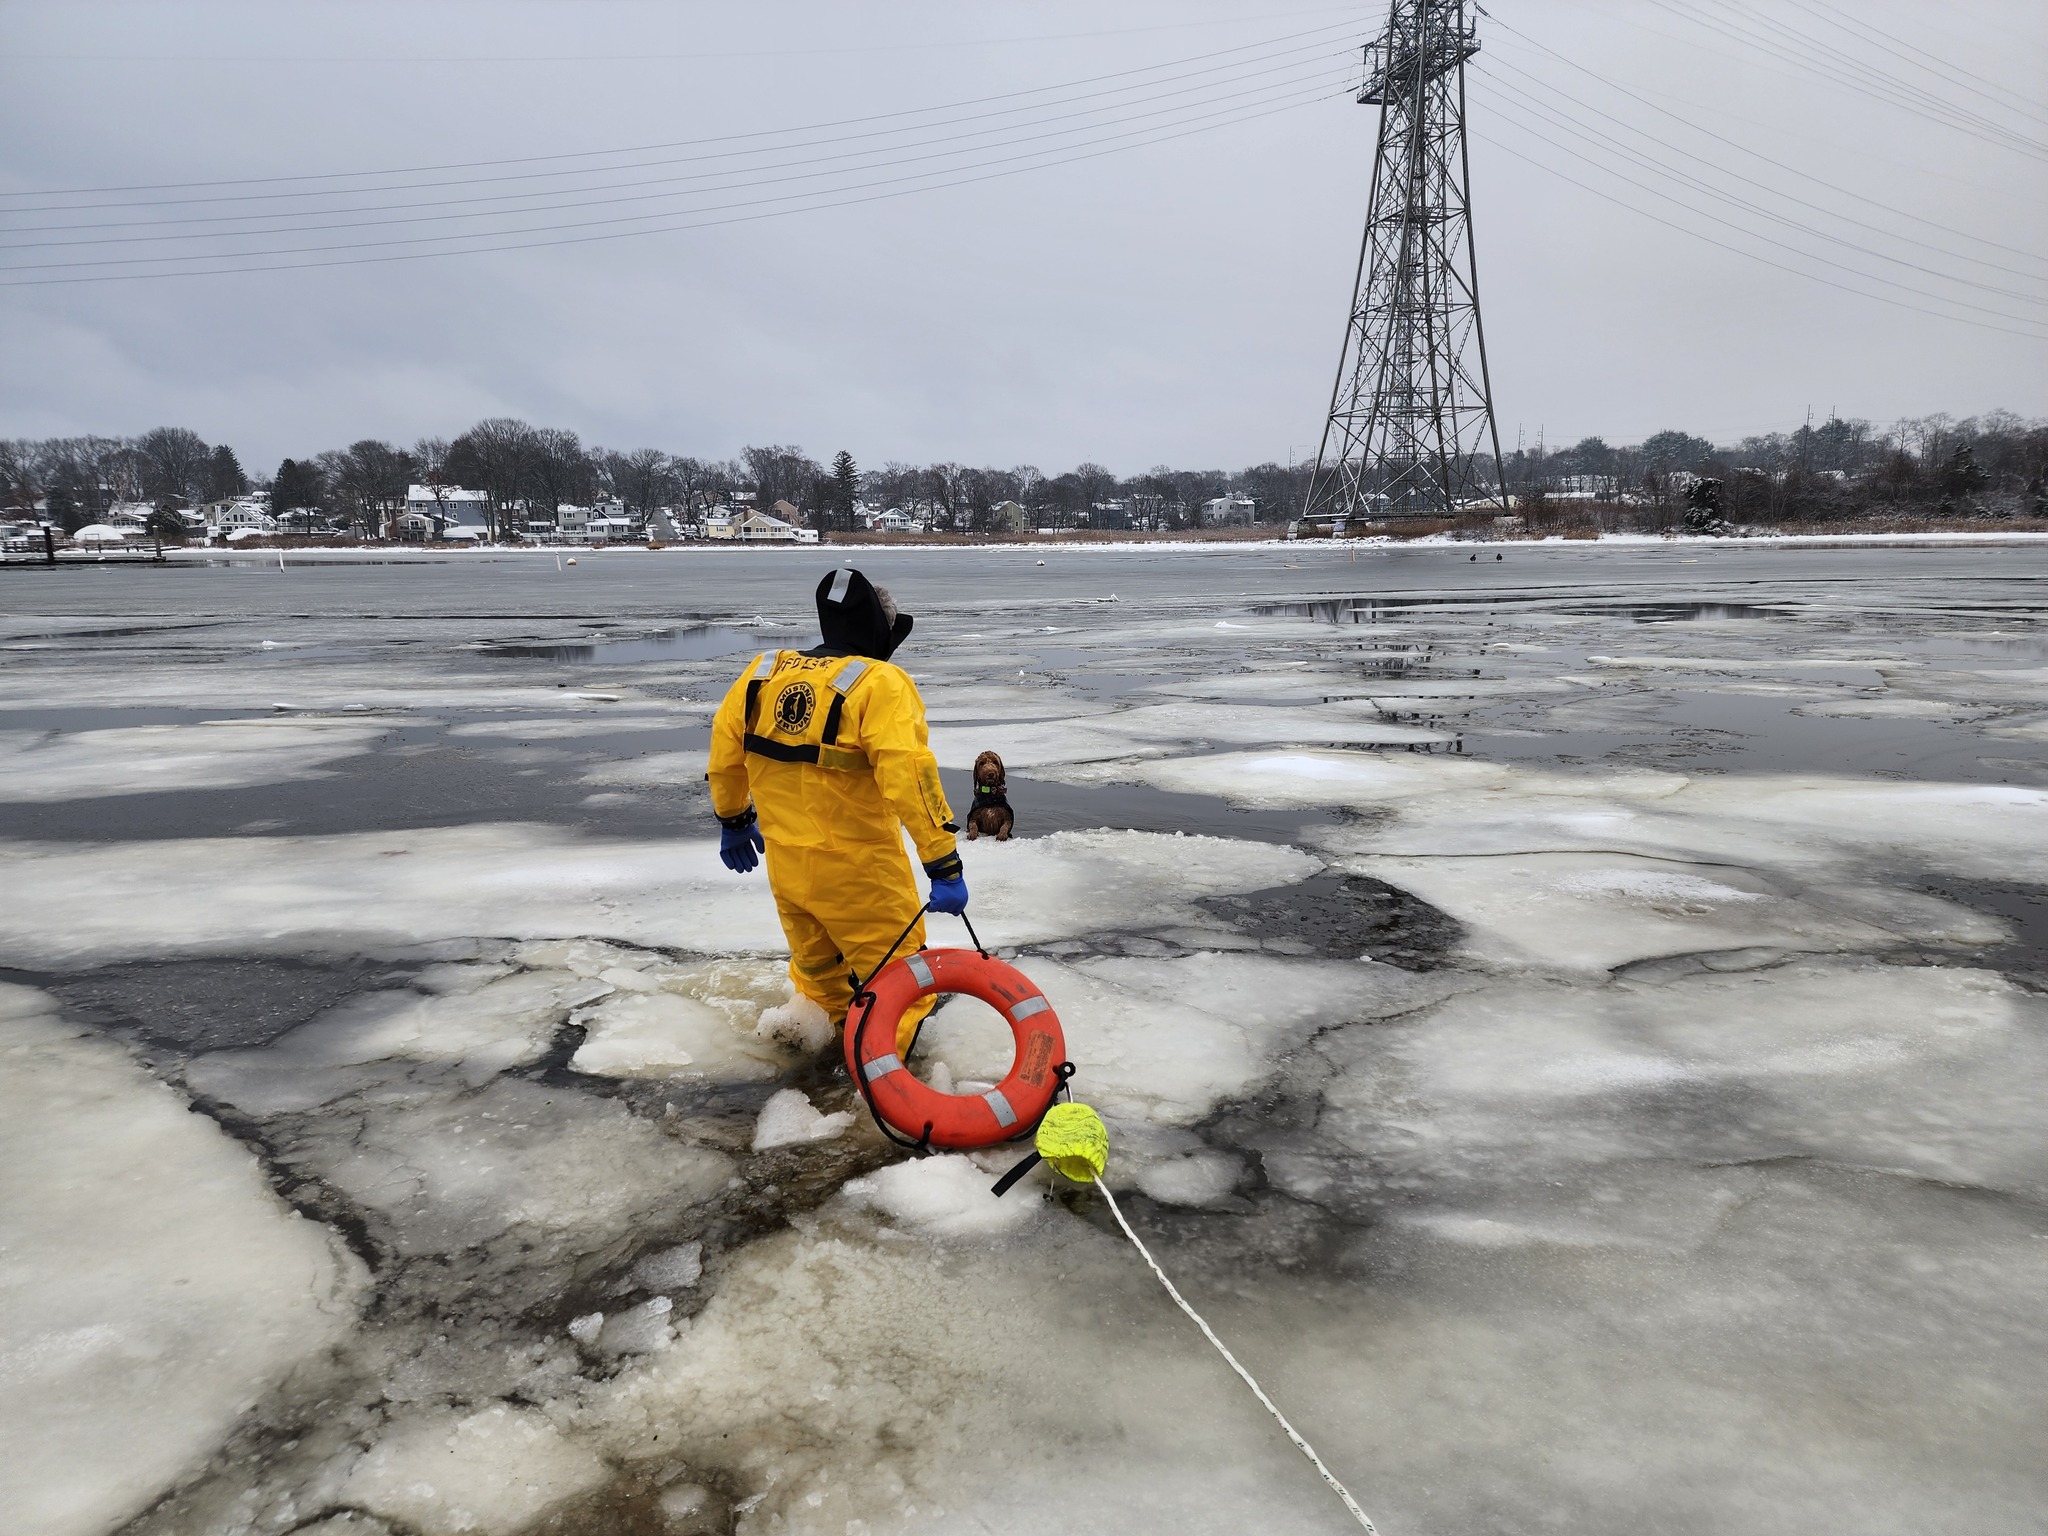 heartwarming moment as a dog is rescued from a frozen river in Braintree, Massachusetts, US.